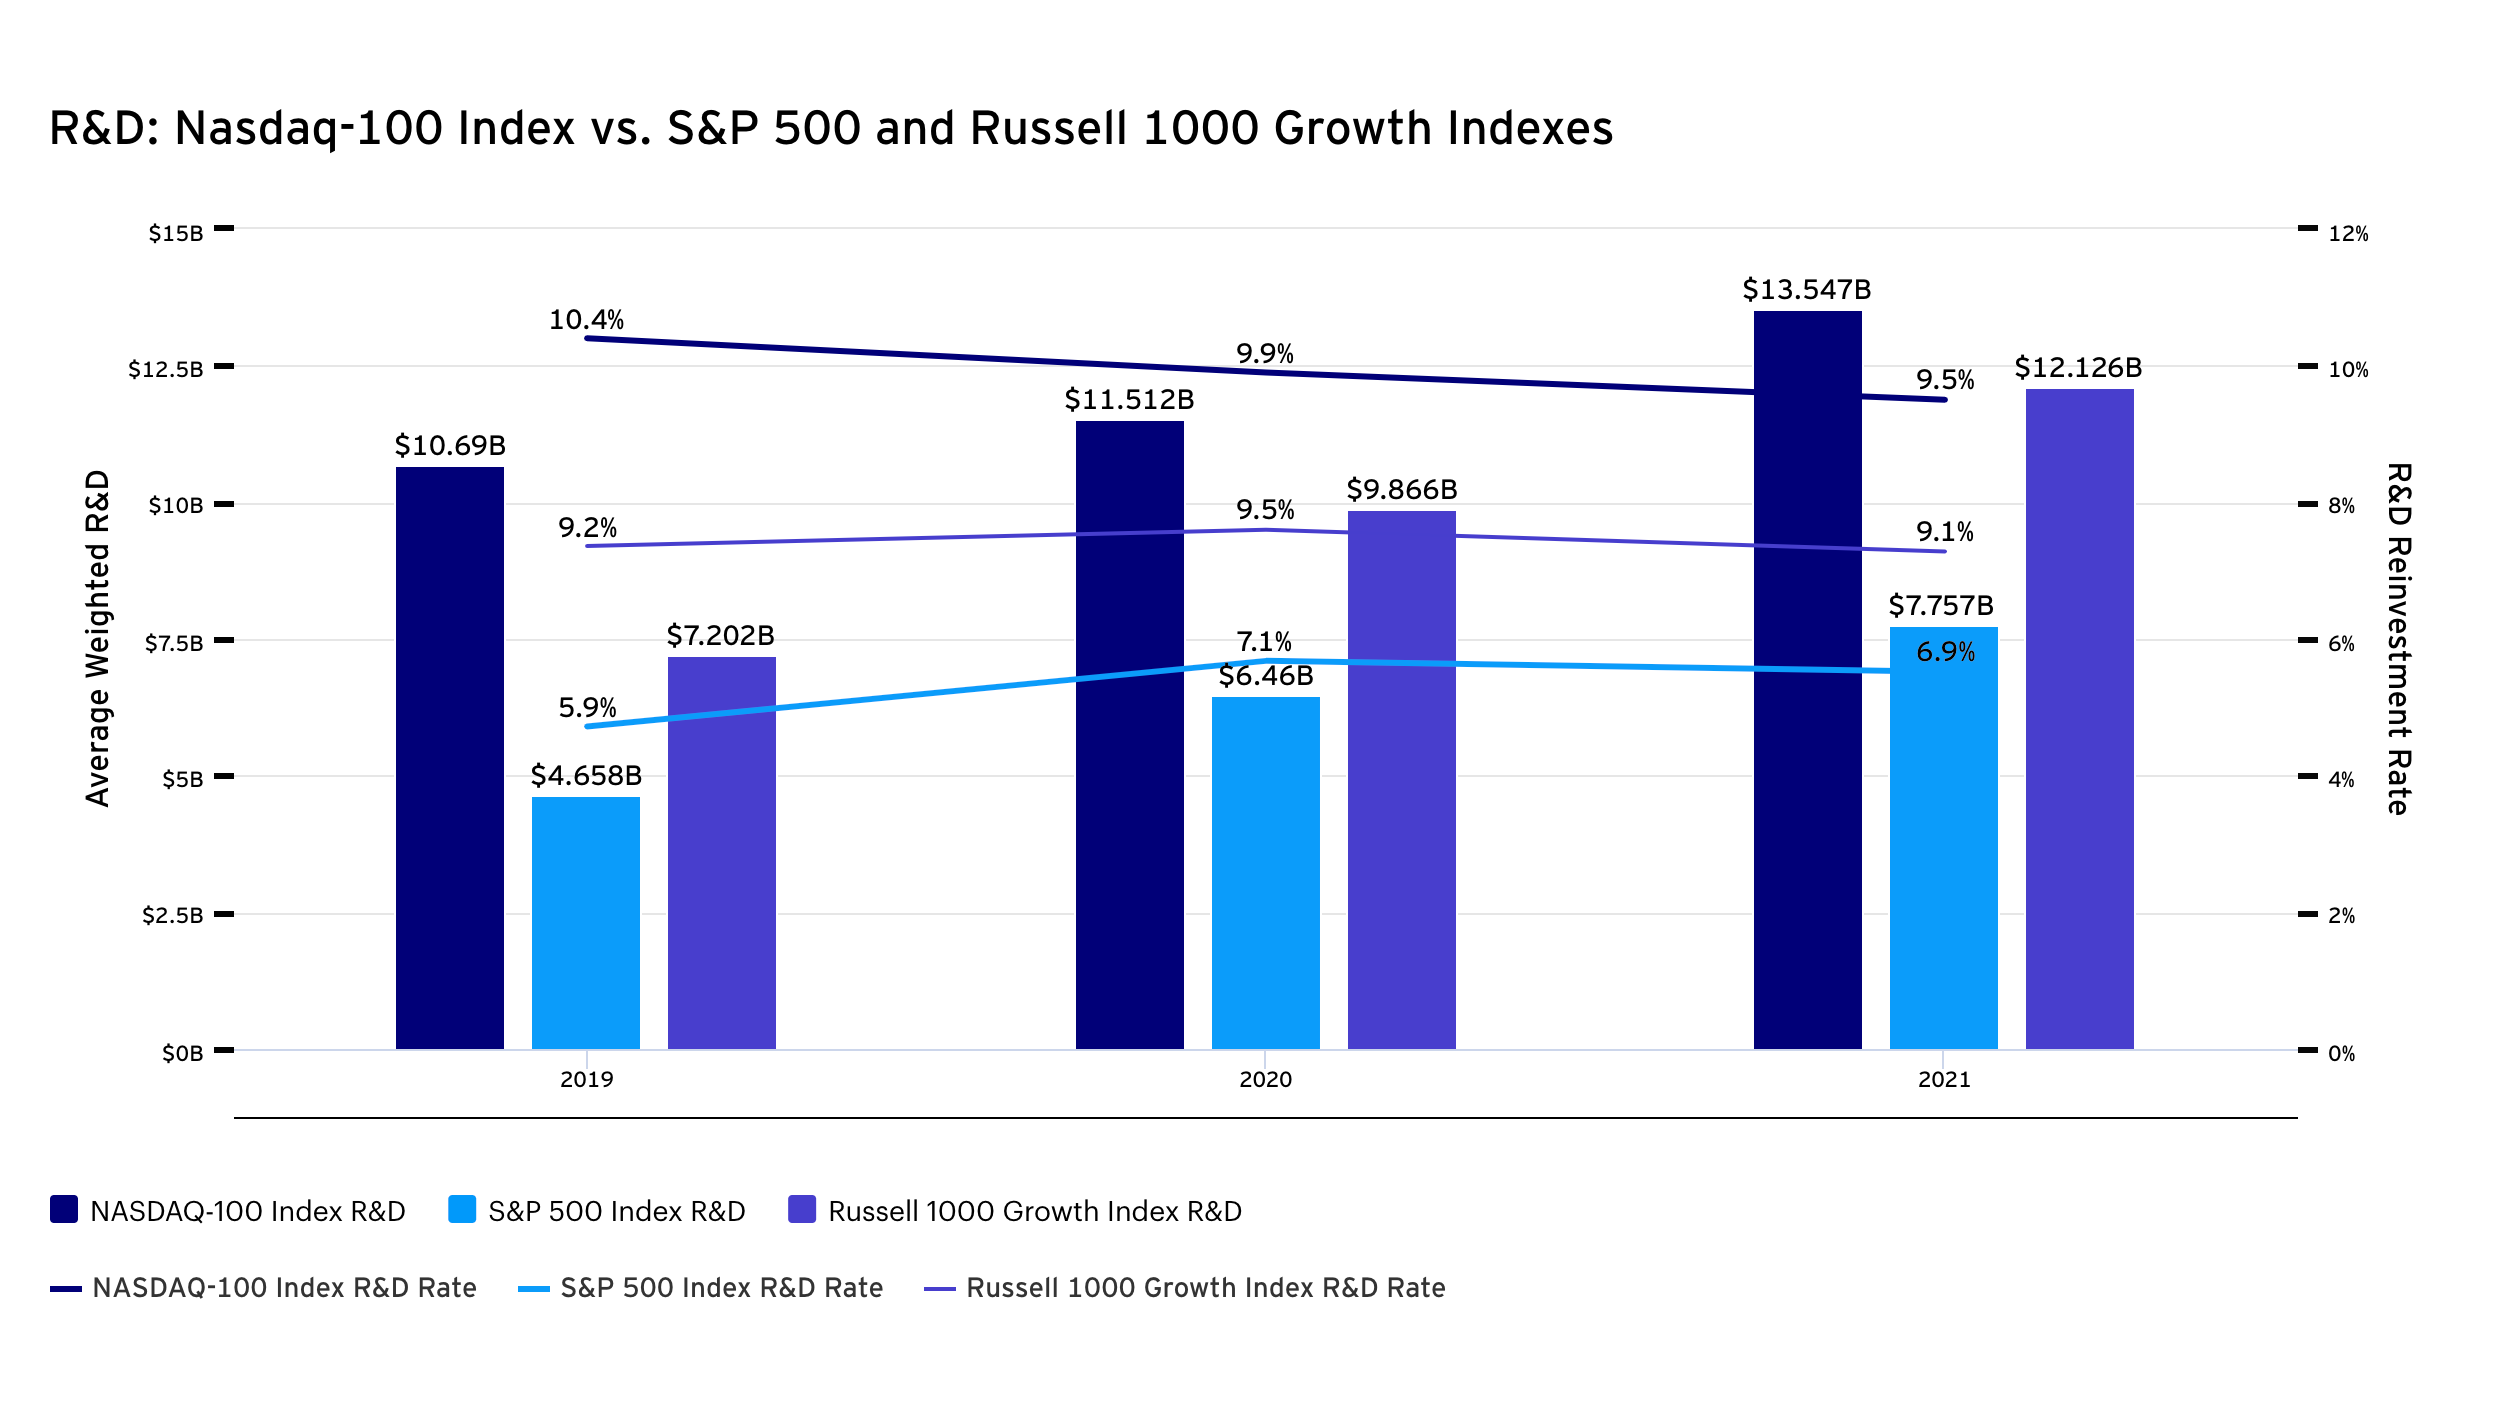 R&D: Nasdaq-100 Index vs. S&P 500 and Russell 1000 Growth Indexes